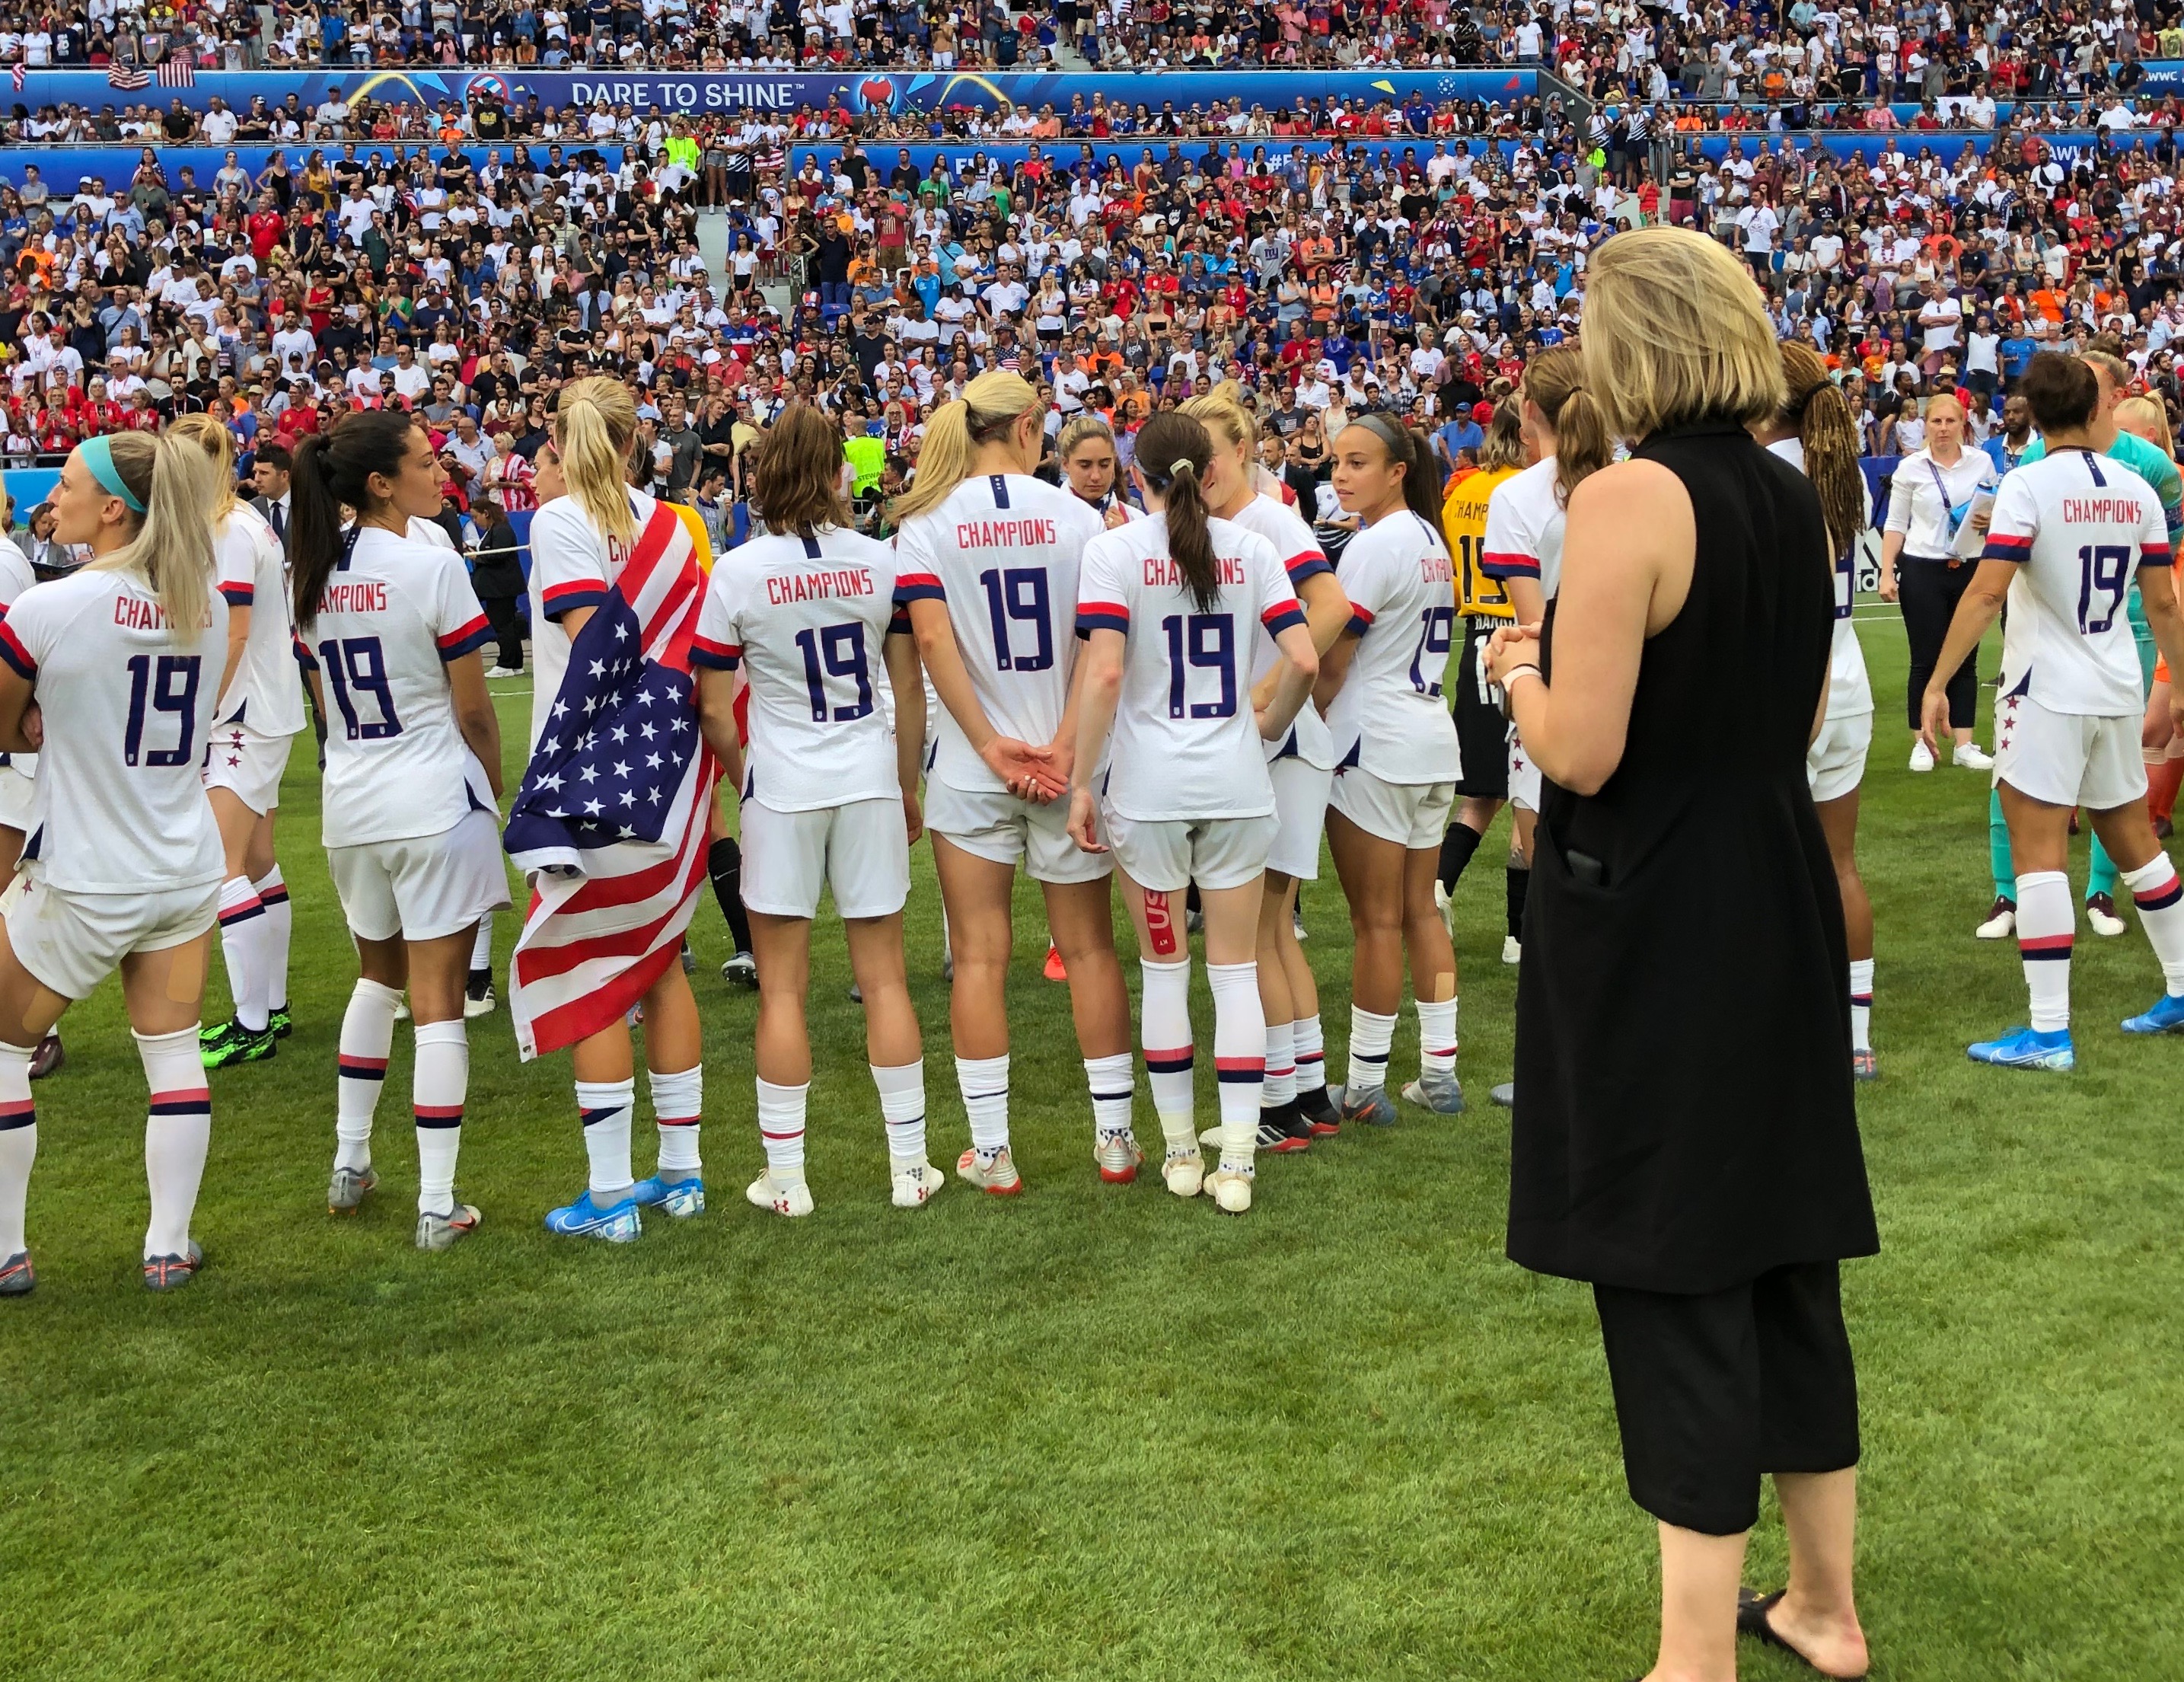 Molly Downtain stands on the field during the Wold Cup celebration.